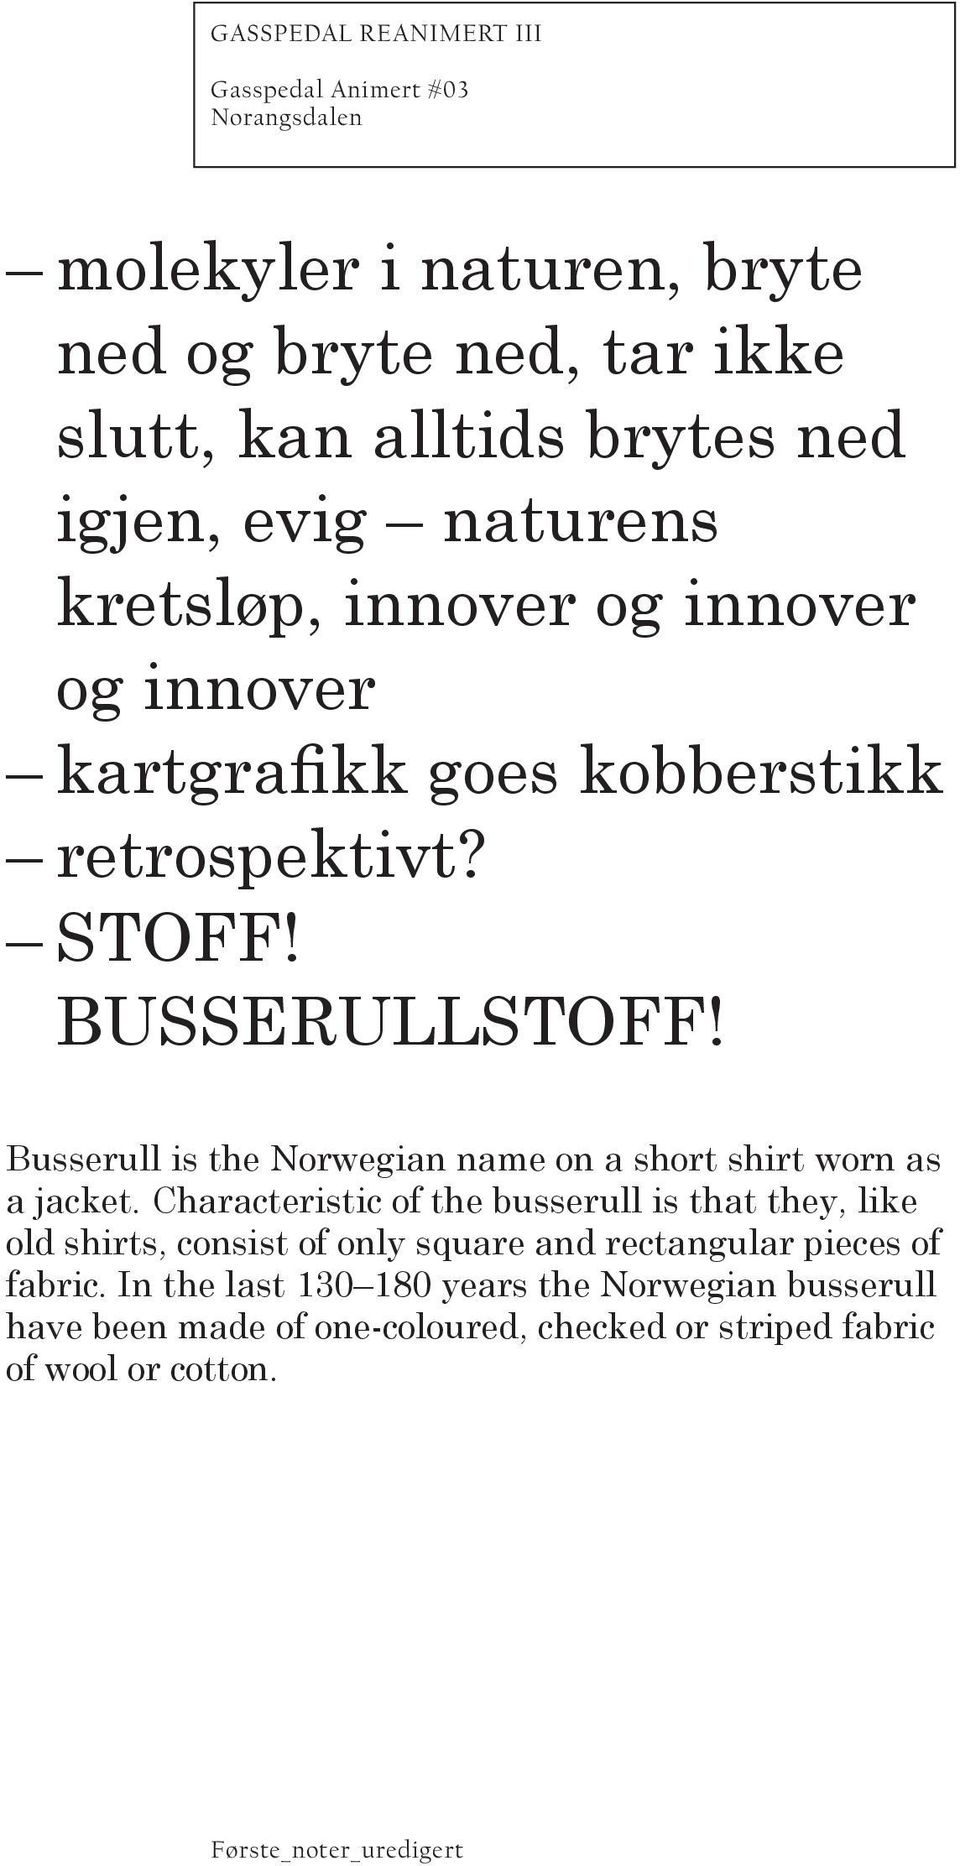 Busserull is the Norwegian name on a short shirt worn as a jacket.